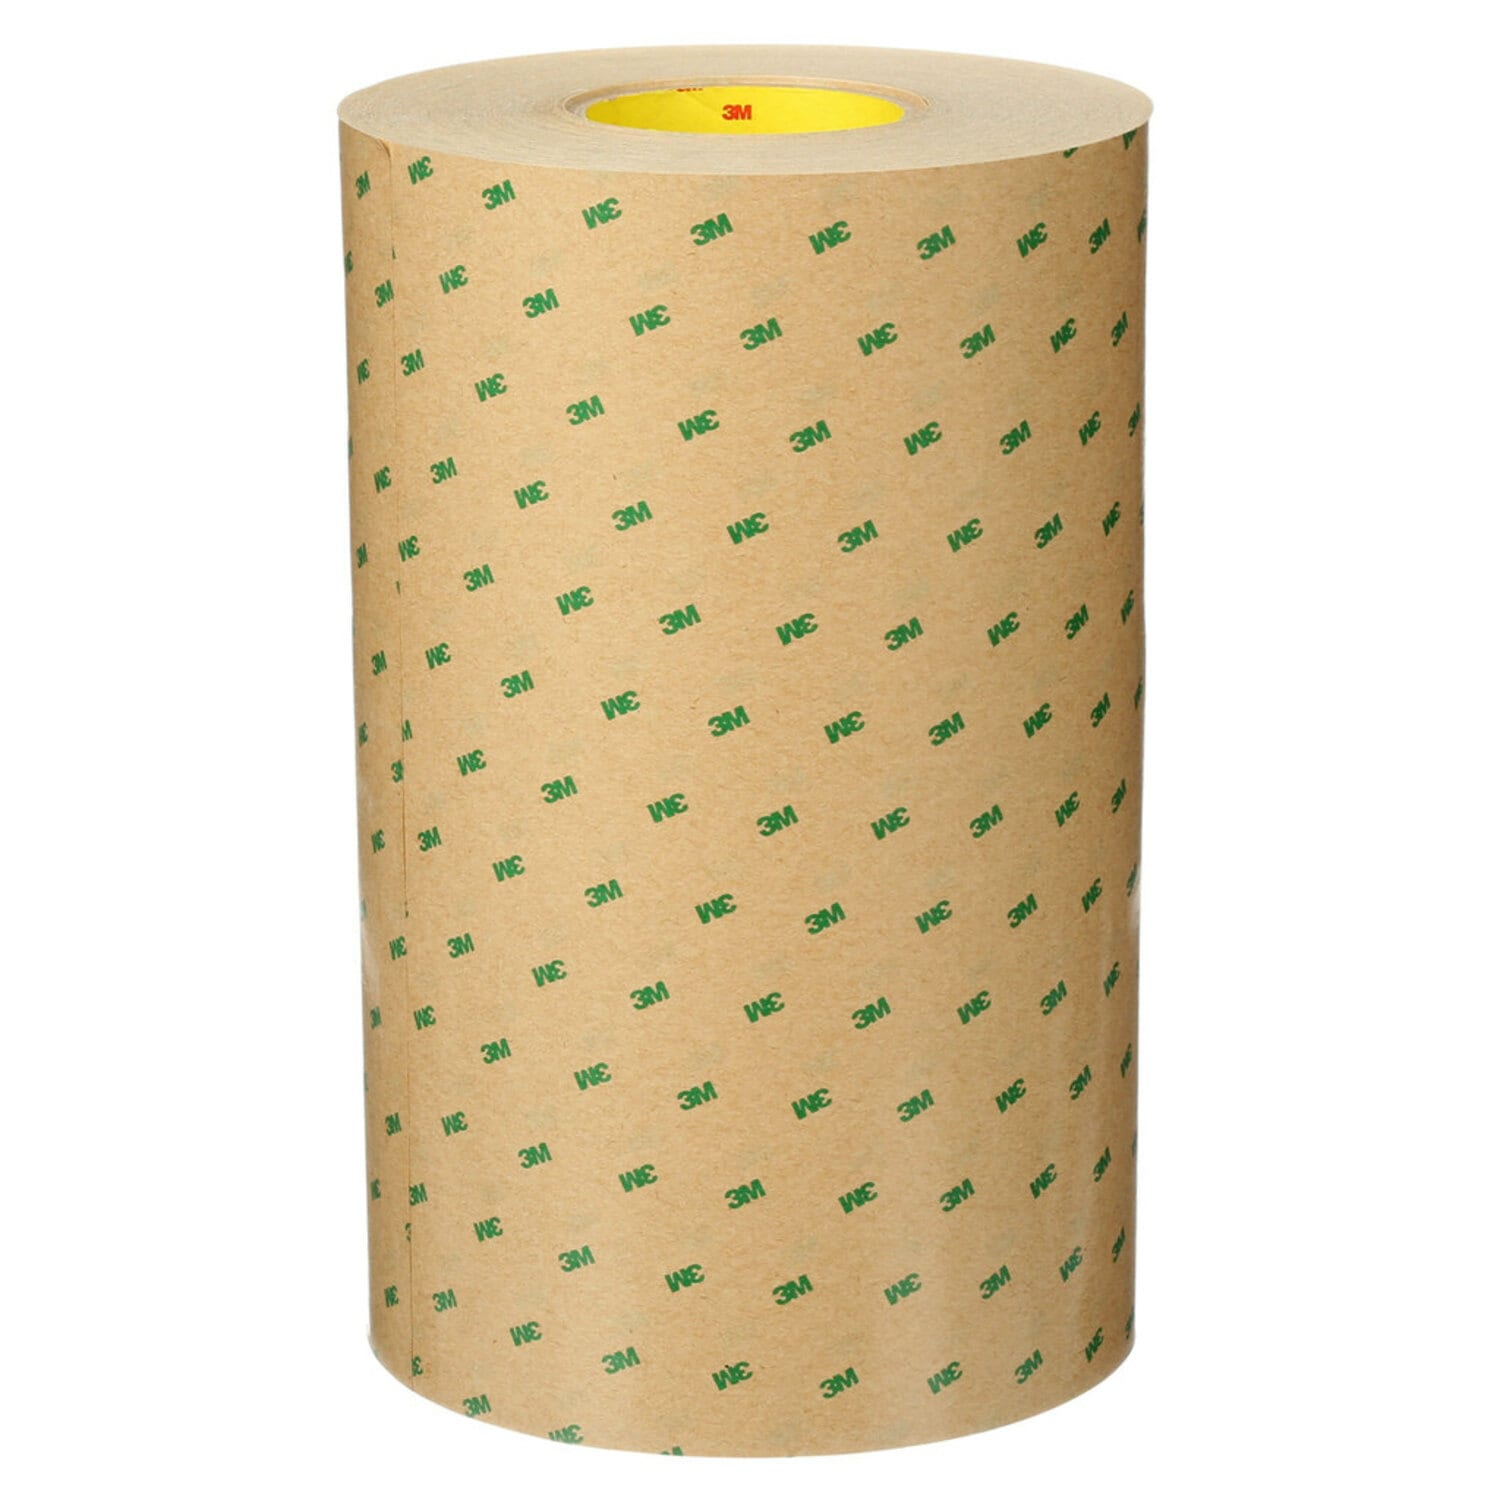 7100077151 - 3M Adhesive Transfer Tape 9471, Clear, 1 in x 60 yd, 2 mil, 36 rolls
per case